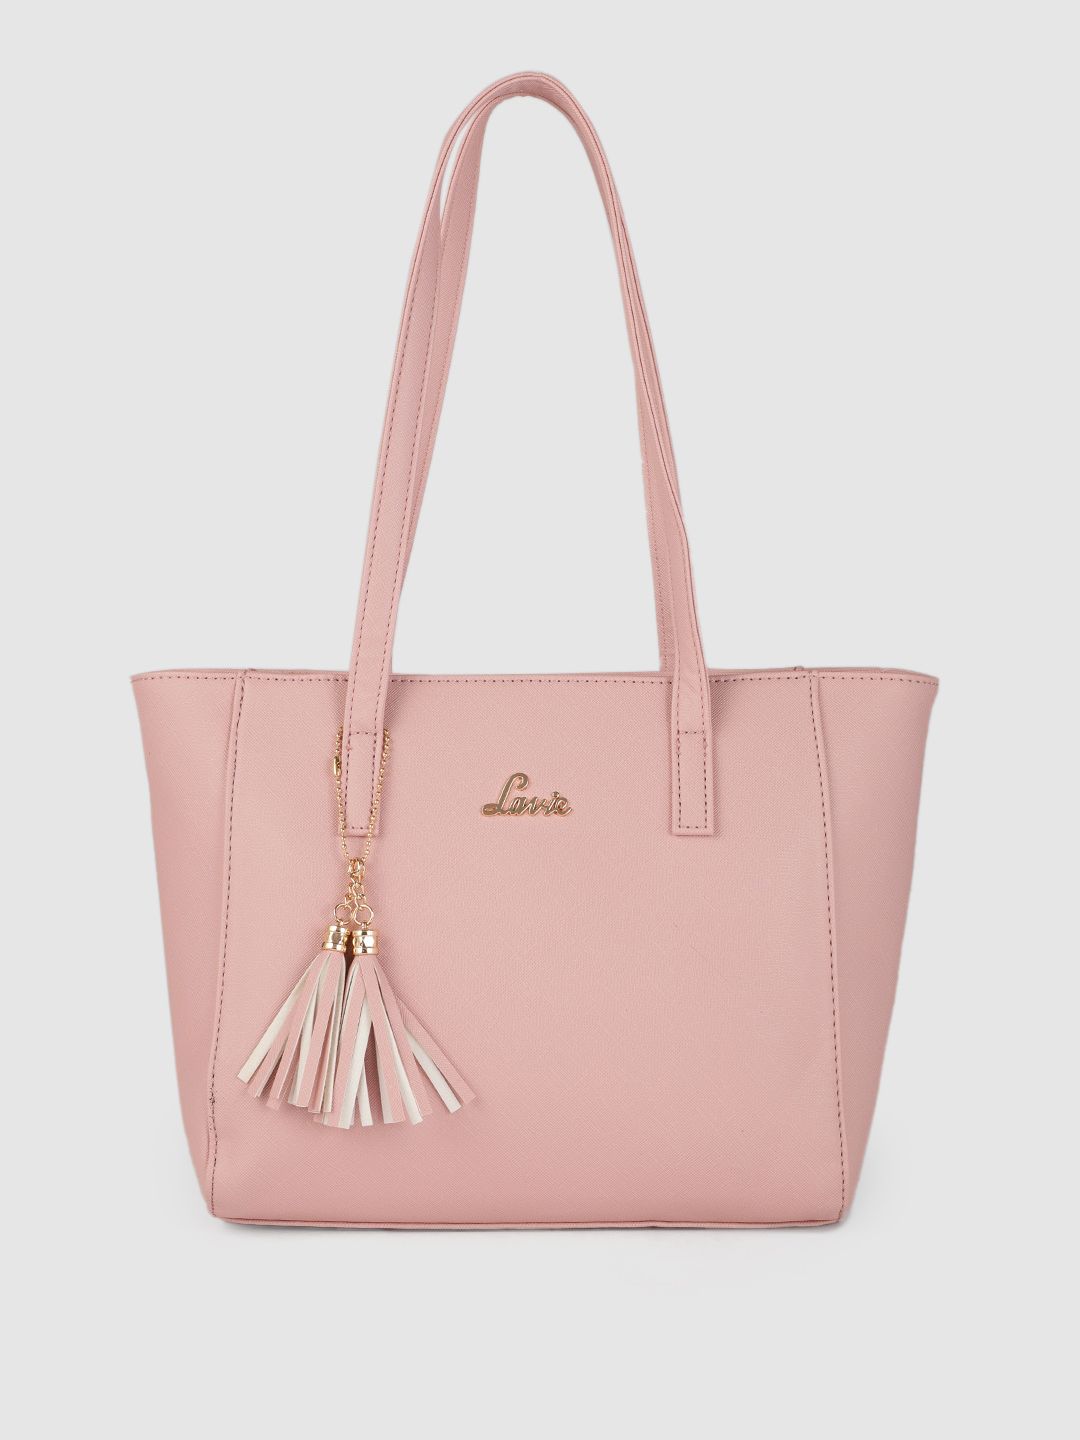 Lavie Dusty Pink Solid Tasselled Structured Shoulder Bag Price in India